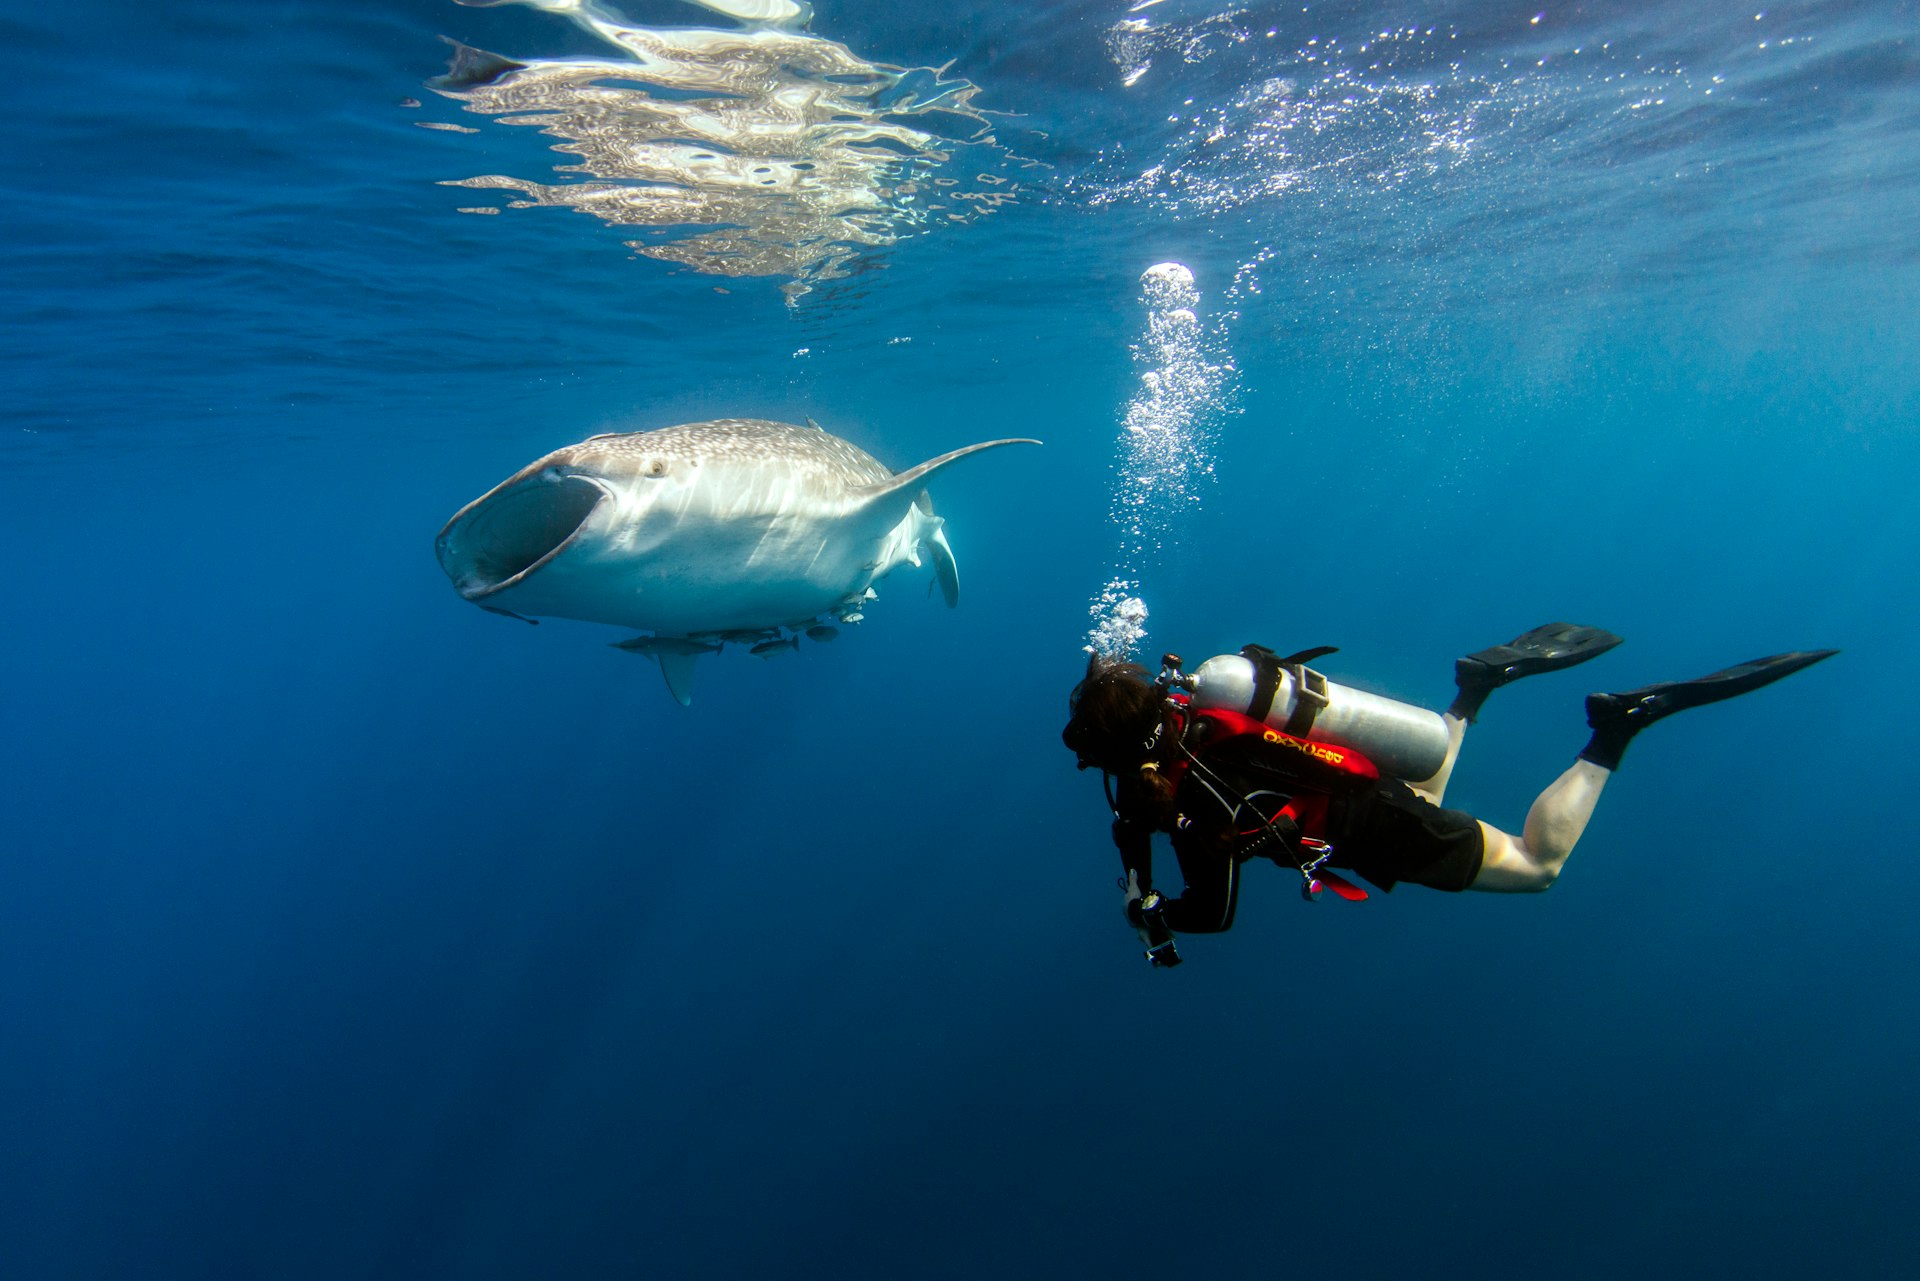 A scuba diver encounters a whale shark at Cenderawasih Bay, Indonesia